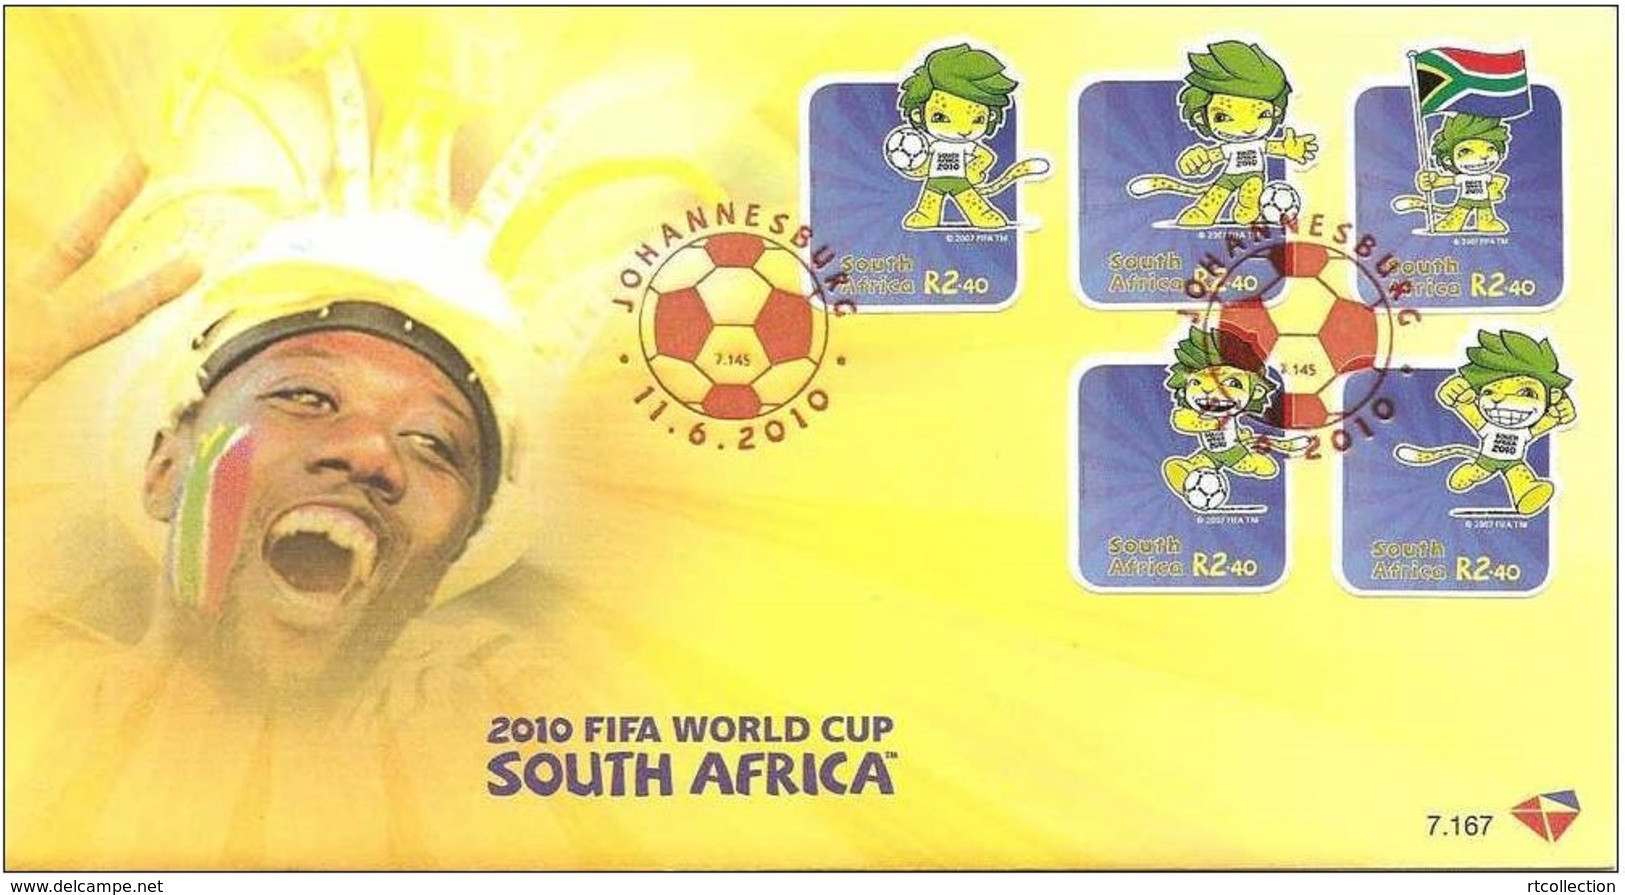 South Africa RSA 2010 First Day Cover FDC FIFA World Cup Football Game Soccer Sports Stamps SG 1781-1785 Rare - Covers & Documents